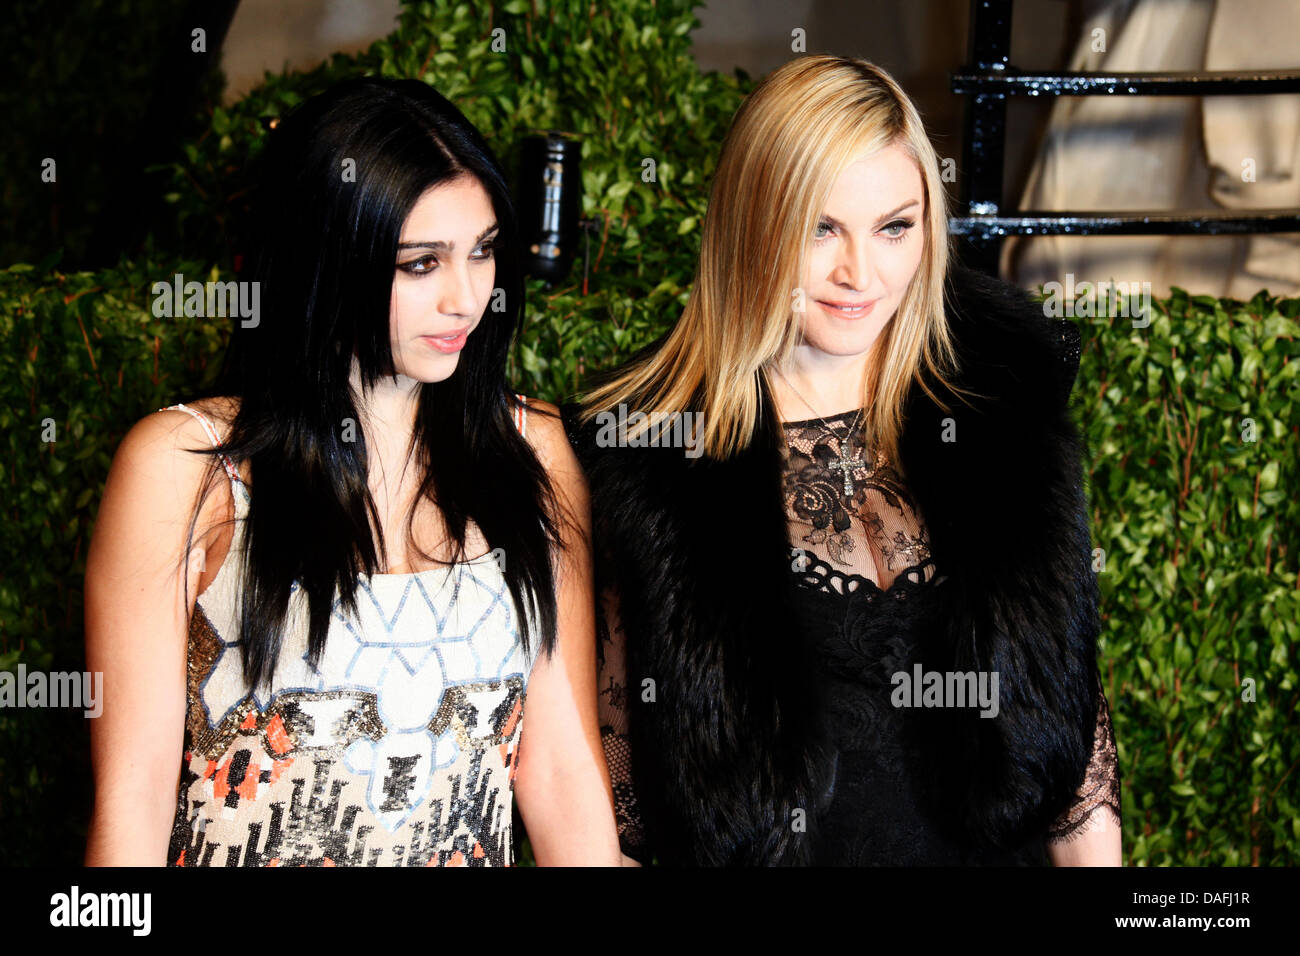 US pop star Madonna (R) and her daughter Lourdes Leon arrive at the Vanity Fair Academy Awards Party at Sunset Tower in Los Angeles, USA, 27 February 2011. Photo: Hubert Boesl Stock Photo